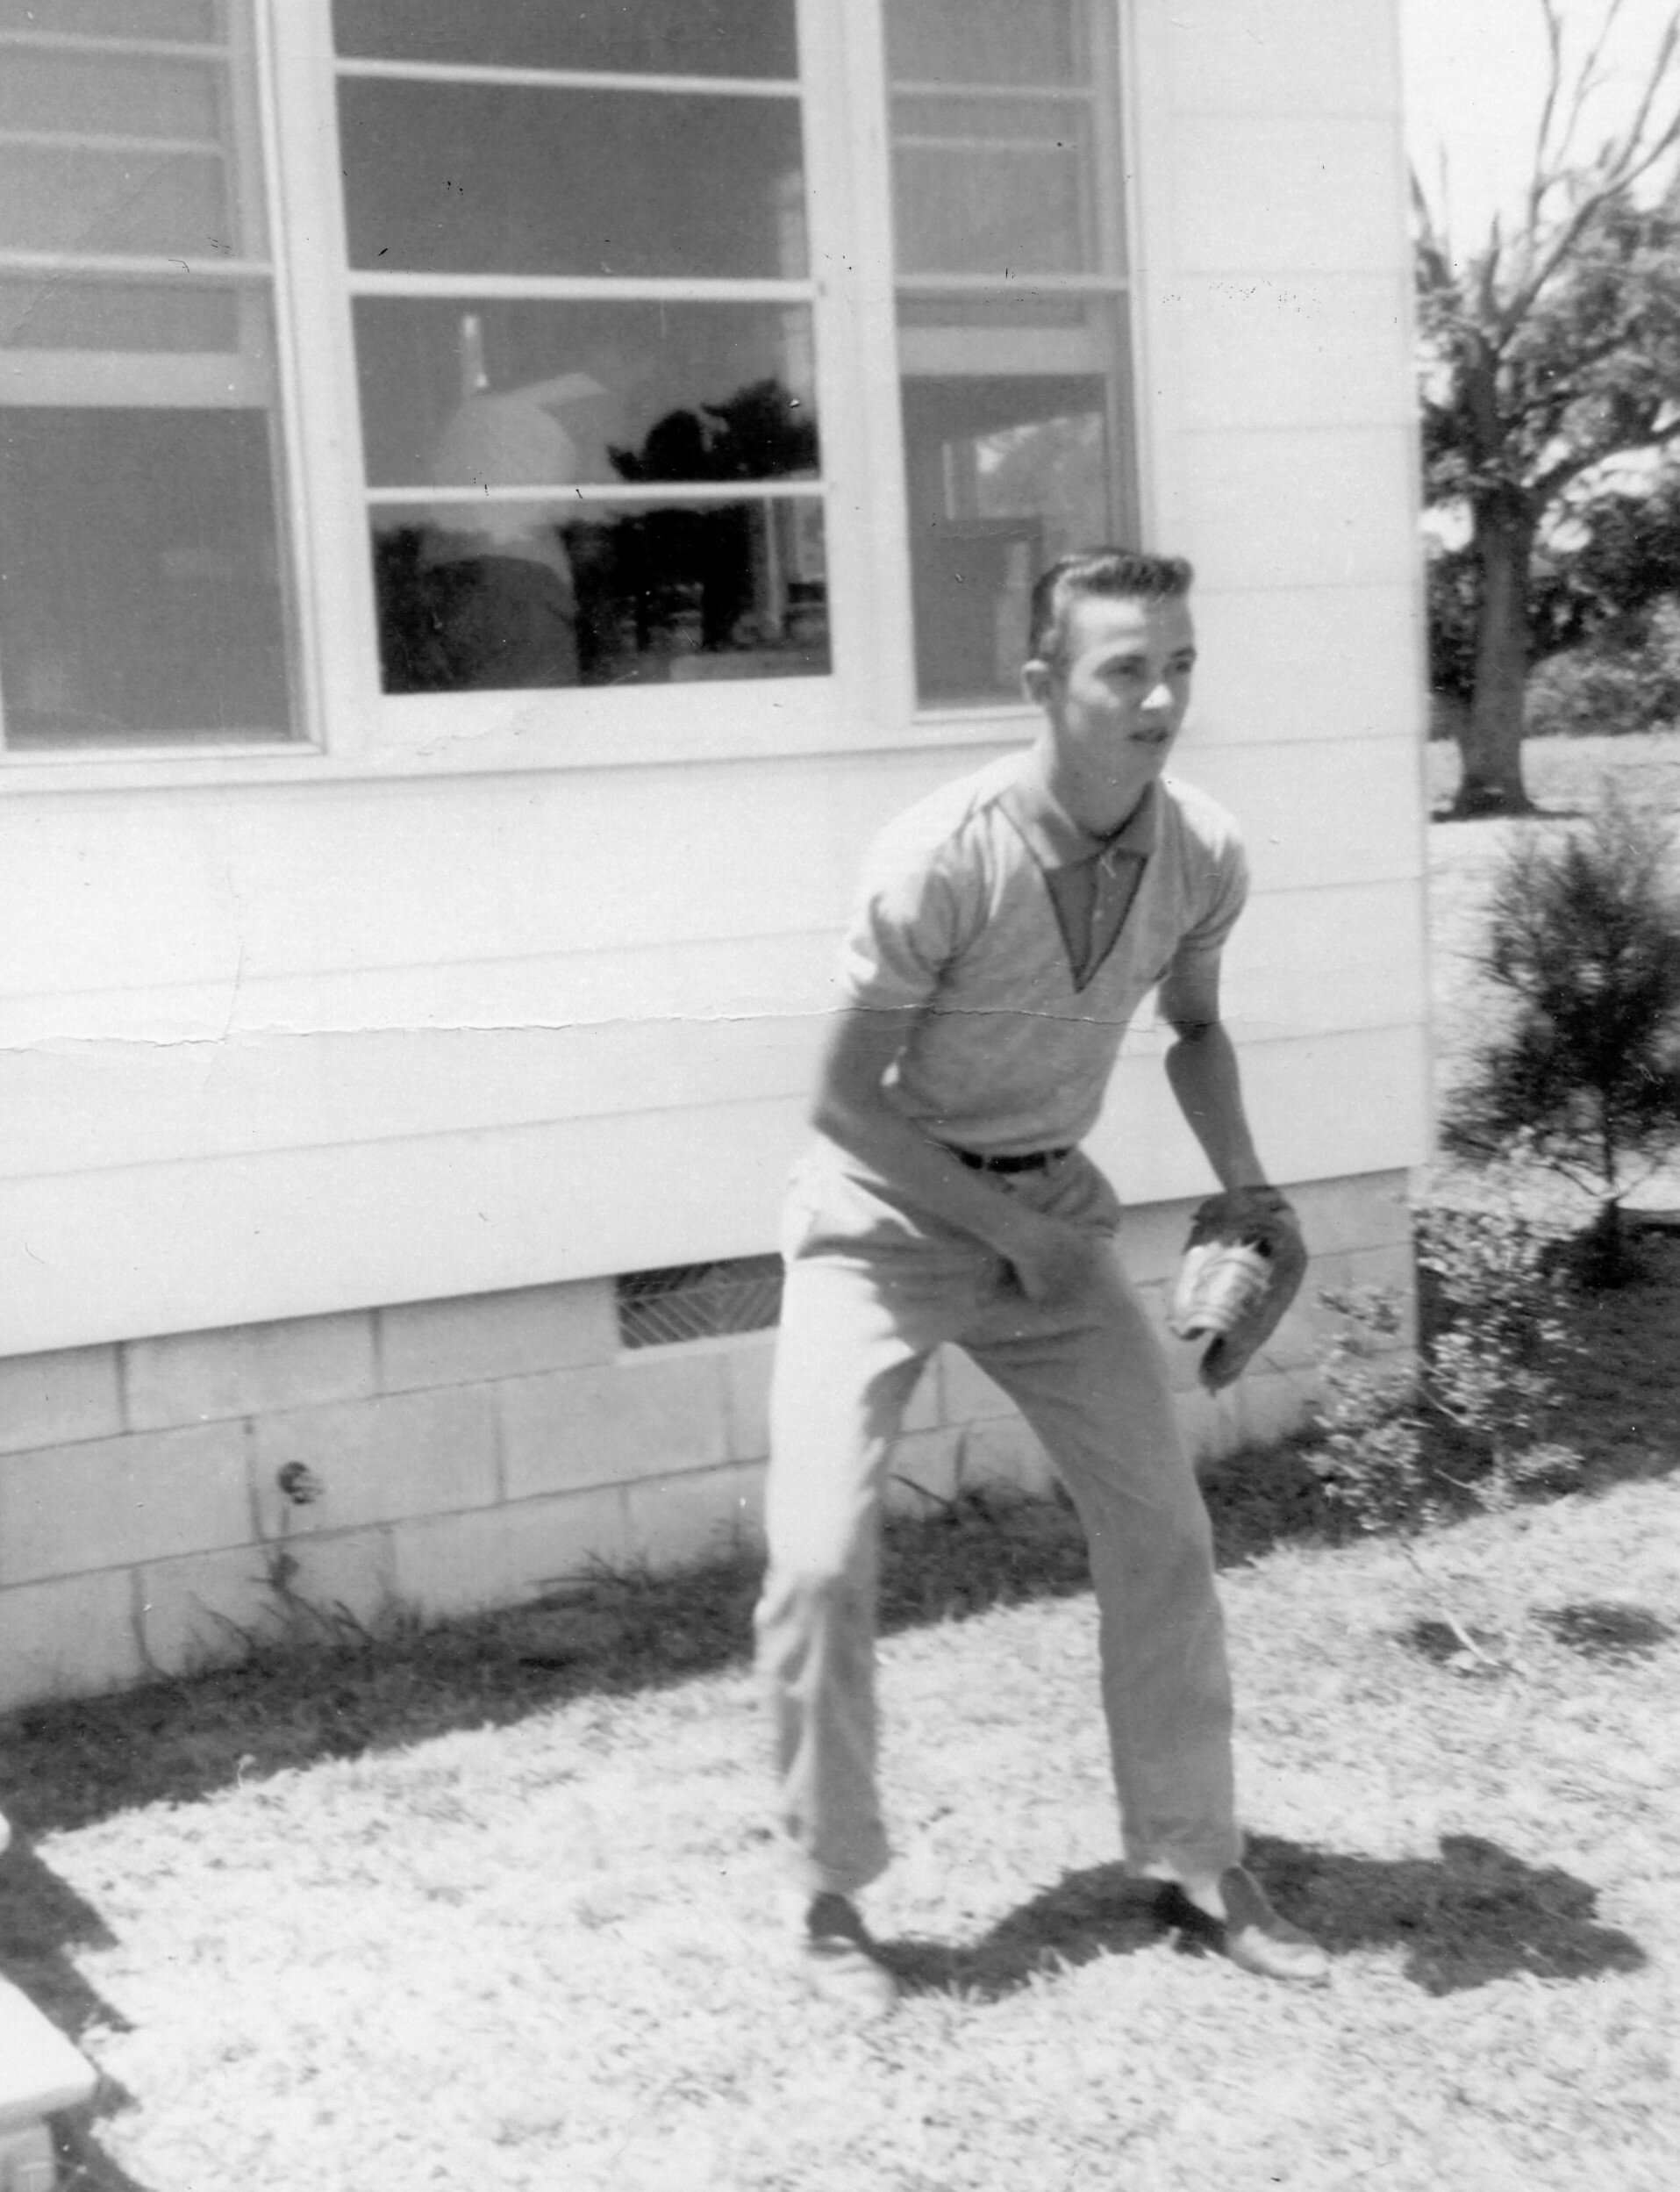 Vernon Chadwick, son of Vance and Dorothy Chadwick, at the Pigott House on Stewart Drive, Straits, 1960’s